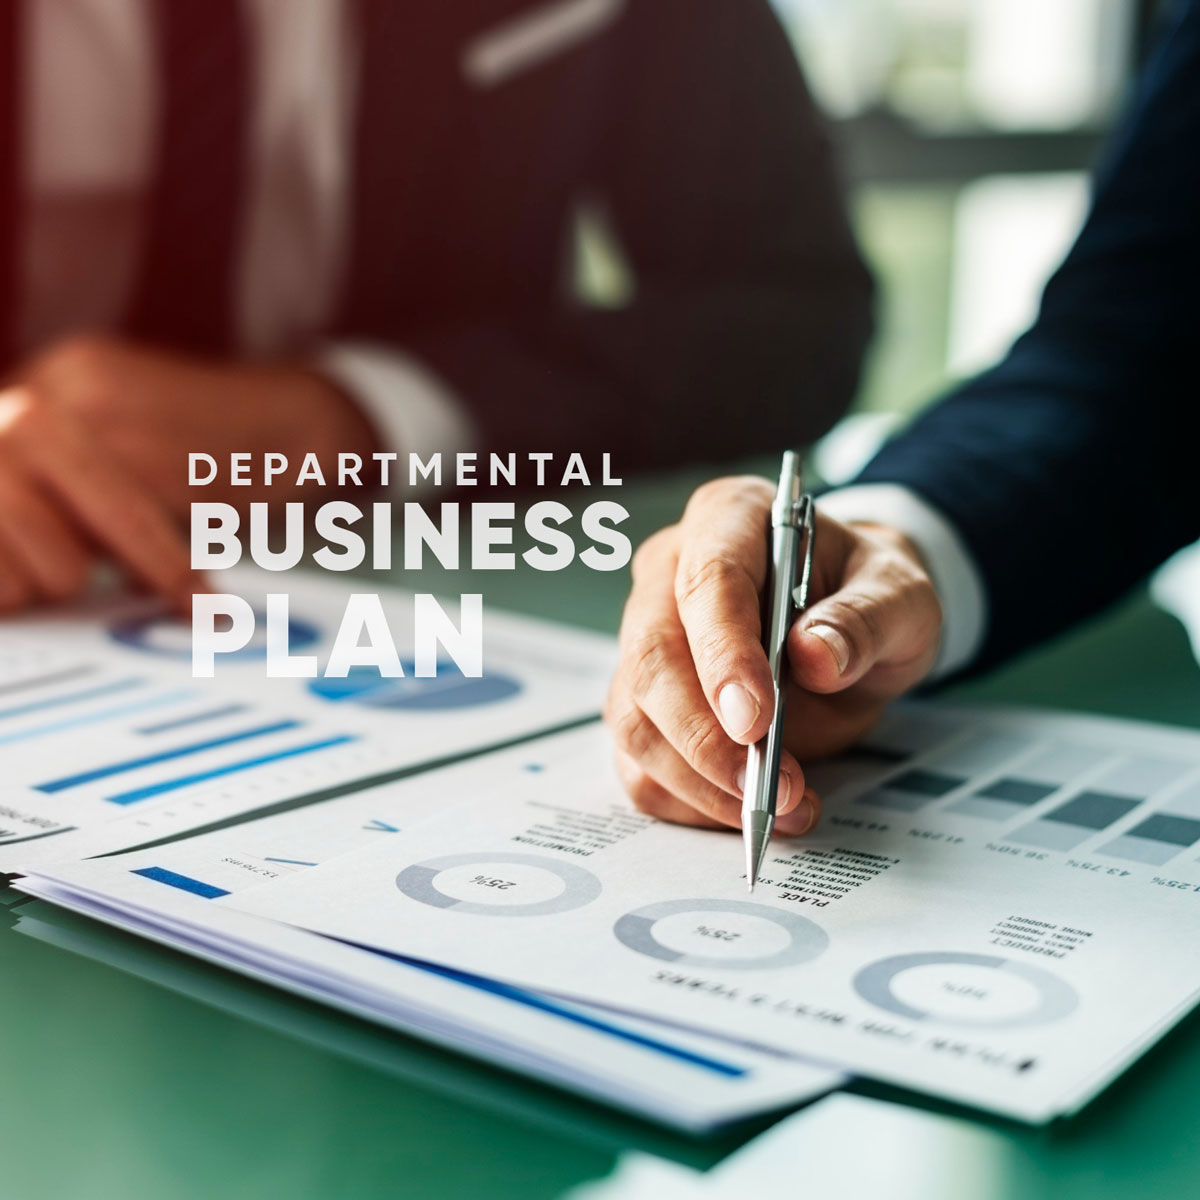 How to Write a Departmental Business Plan - Key Considerations